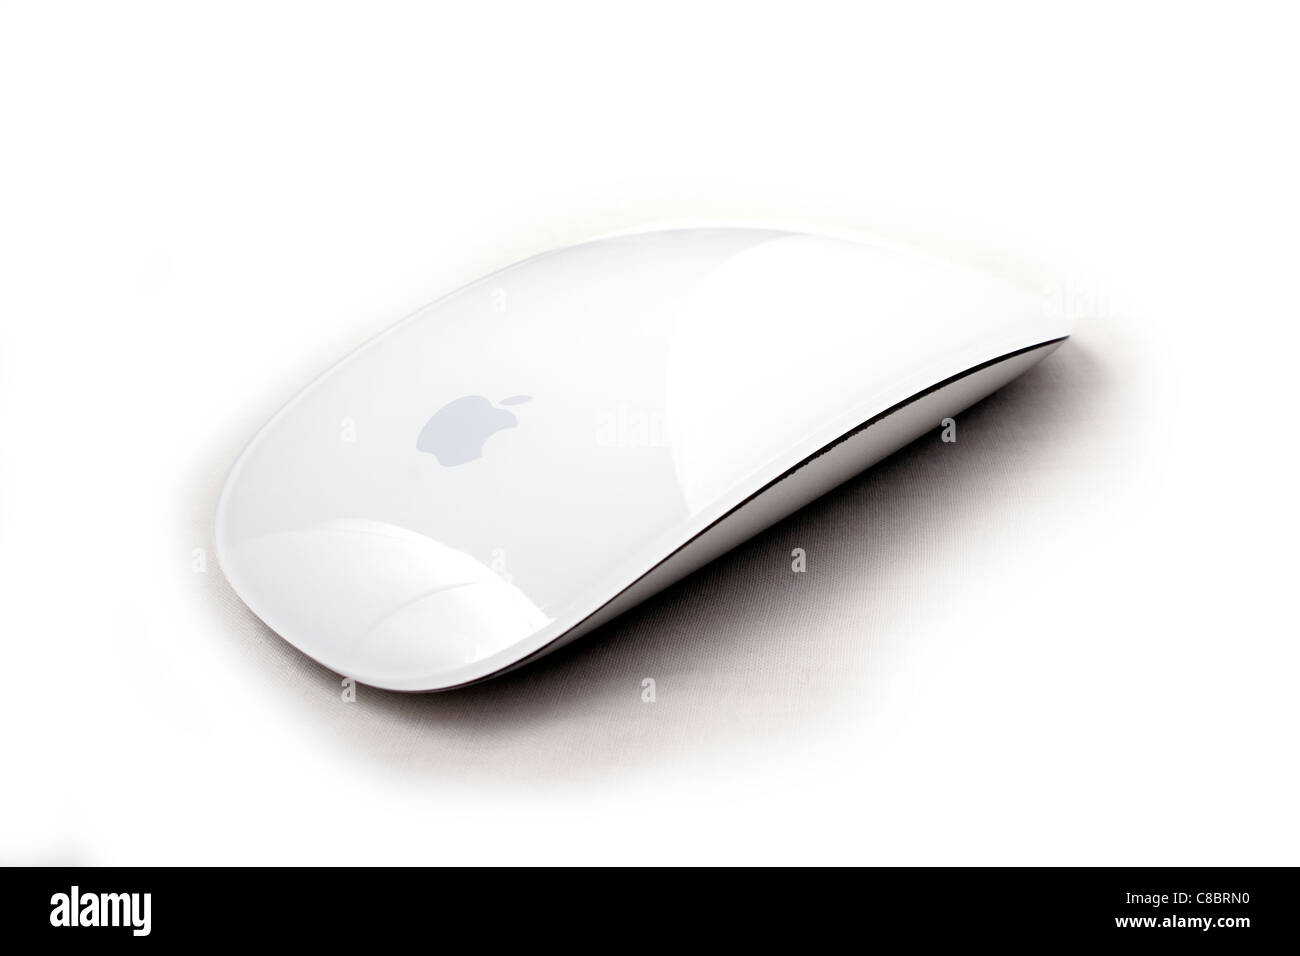 Magic Mouse - Surface Multi‑Touch - Blanc - Apple (FR)